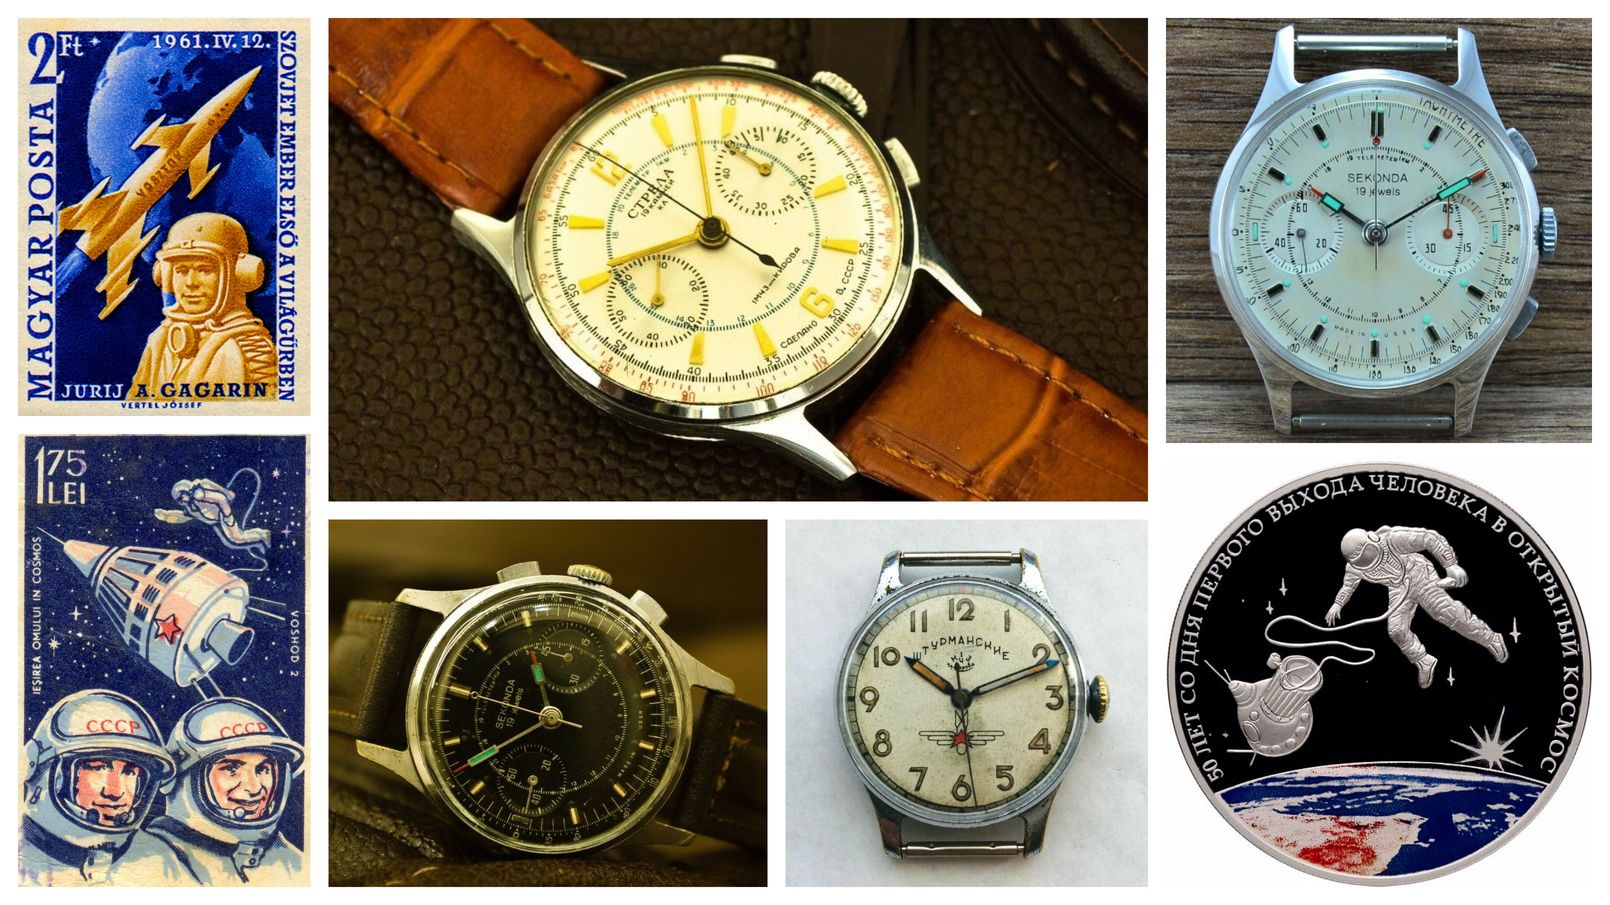 This article focuses on the watches that were used in Russian Vostok, Voskhod and Soyuz space programs and worn by cosmonauts Gagarin, Leonov and Gubarev.